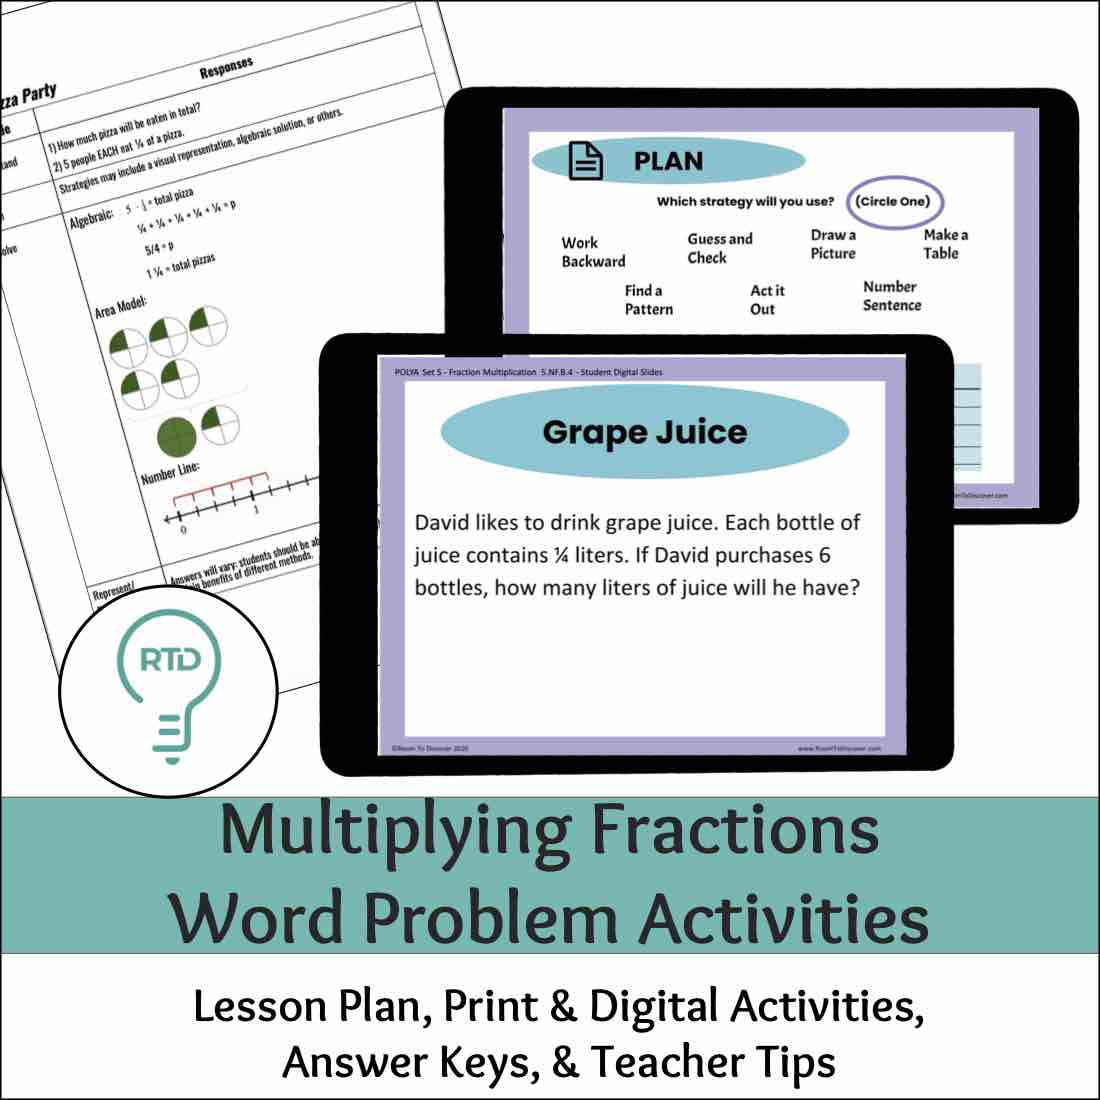 Multiplying Fractions Word Problem Activities  - Complete Digital and Print Lesson